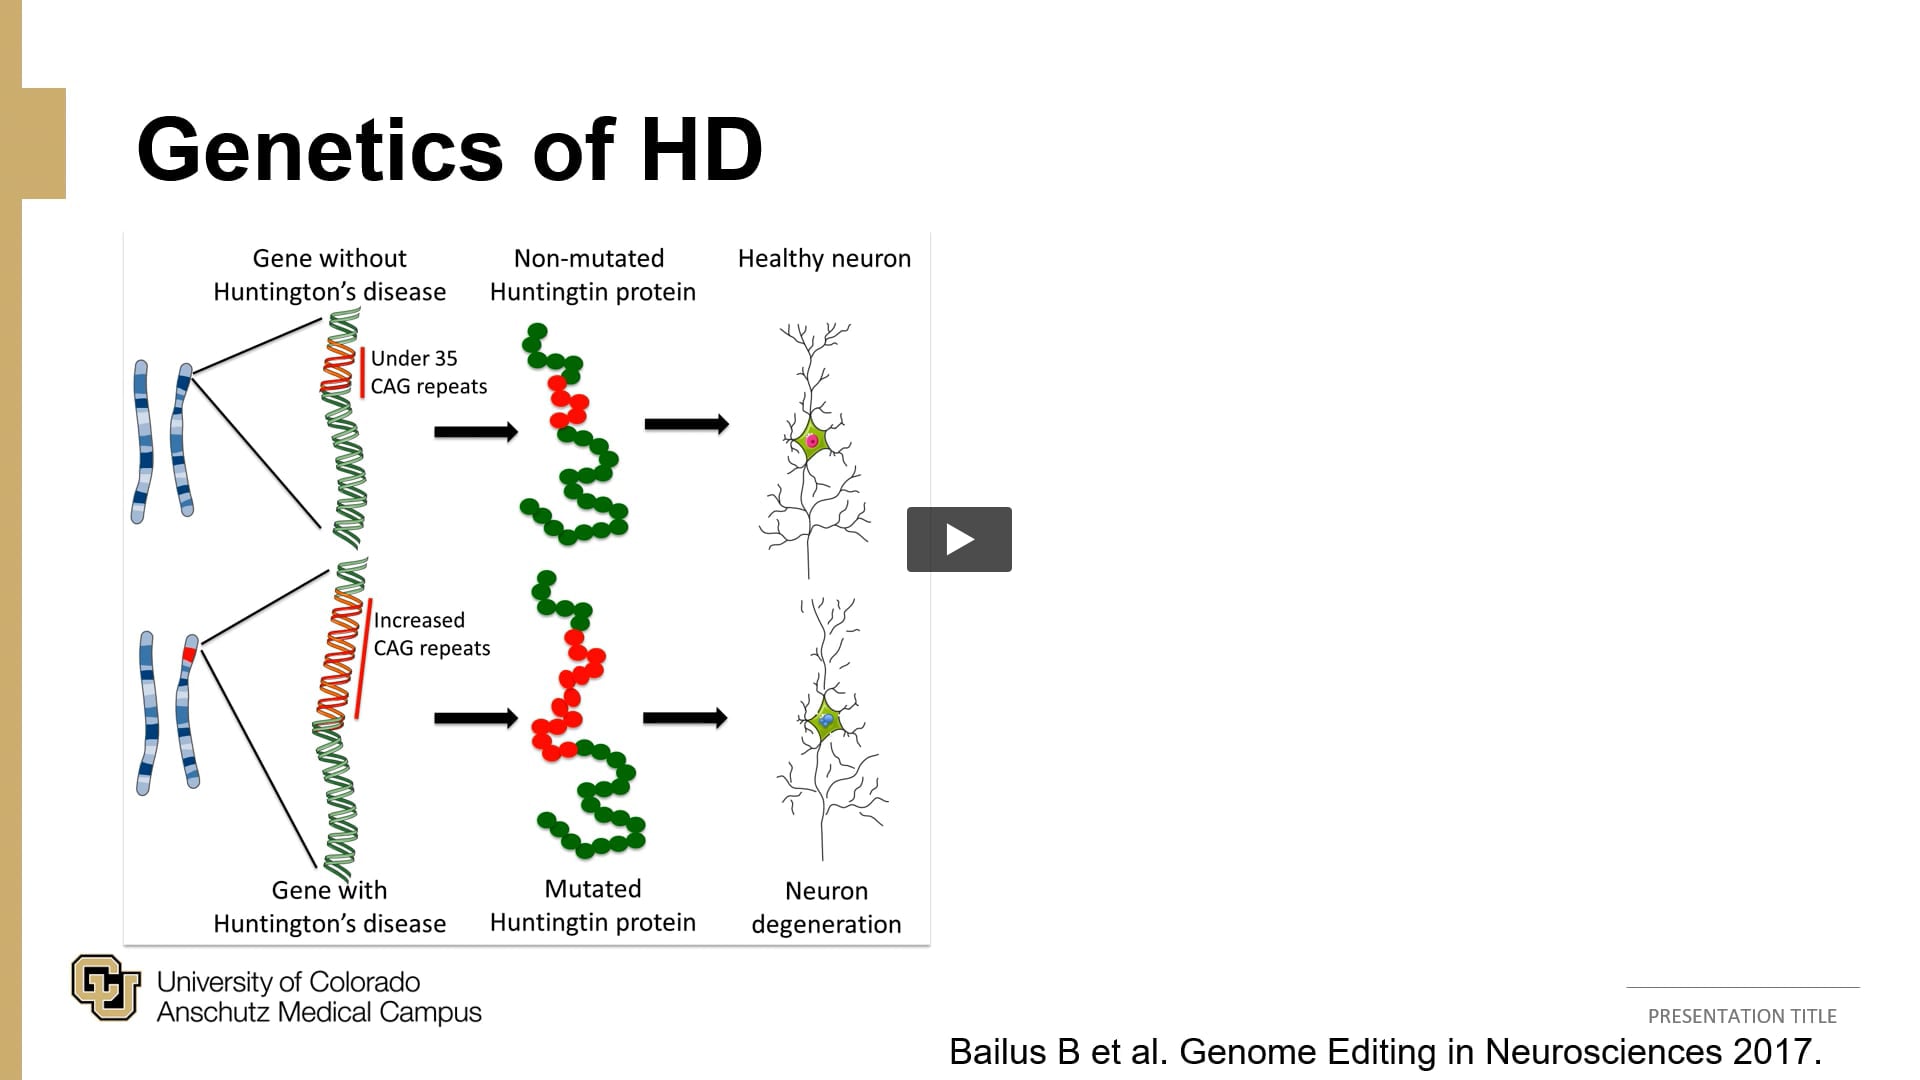 Dr. Emily Forbes on the genetics of HD